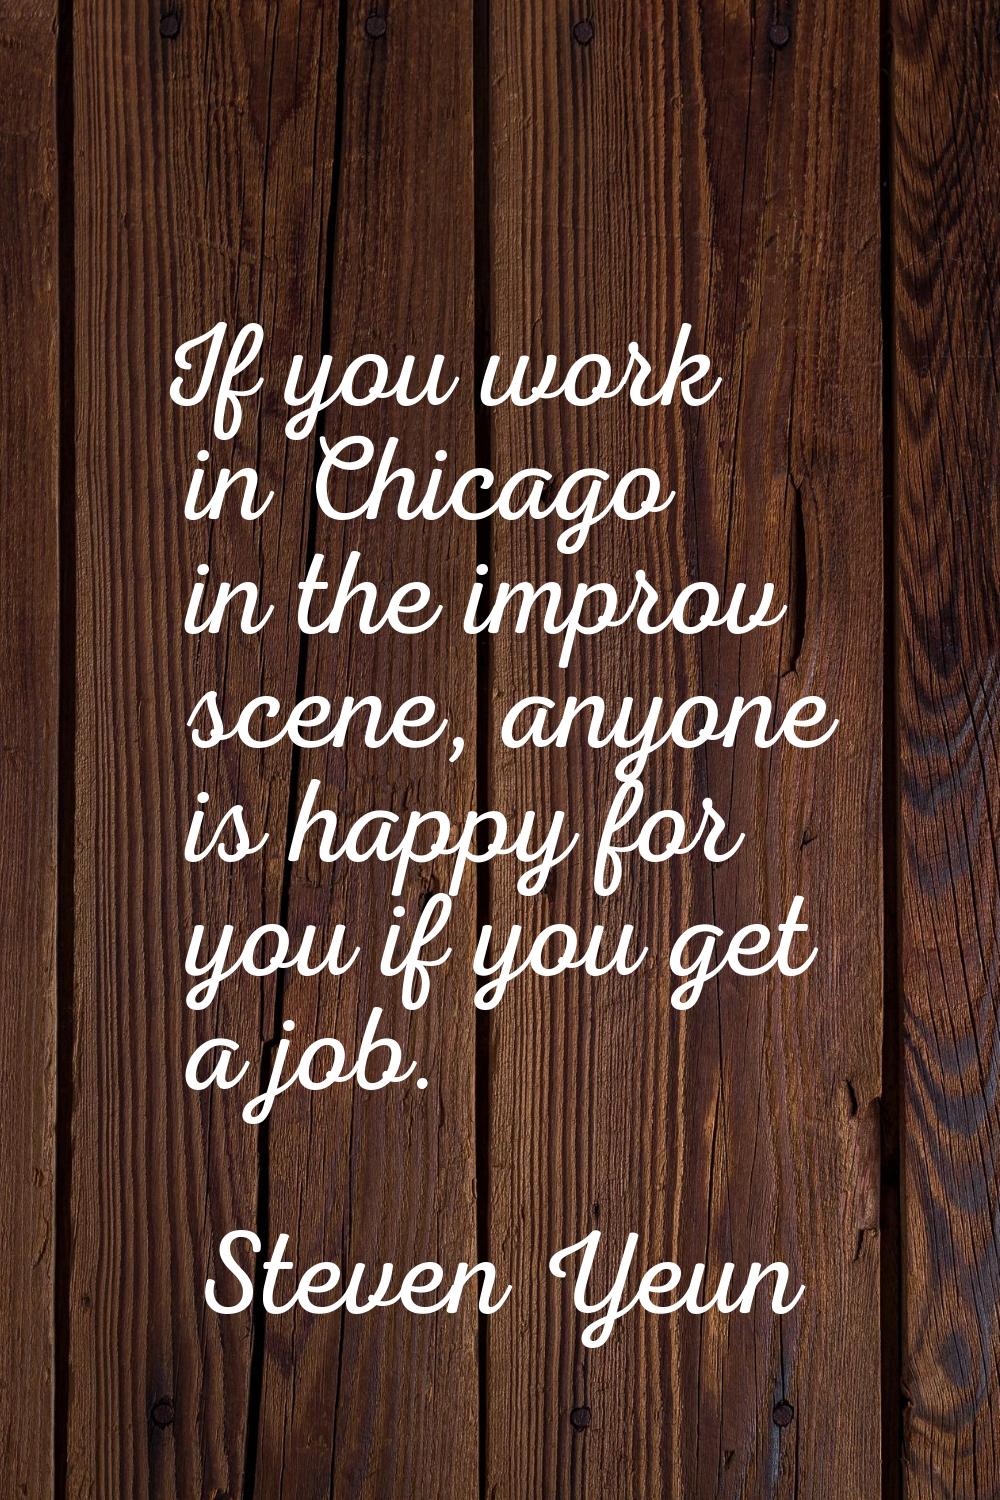 If you work in Chicago in the improv scene, anyone is happy for you if you get a job.